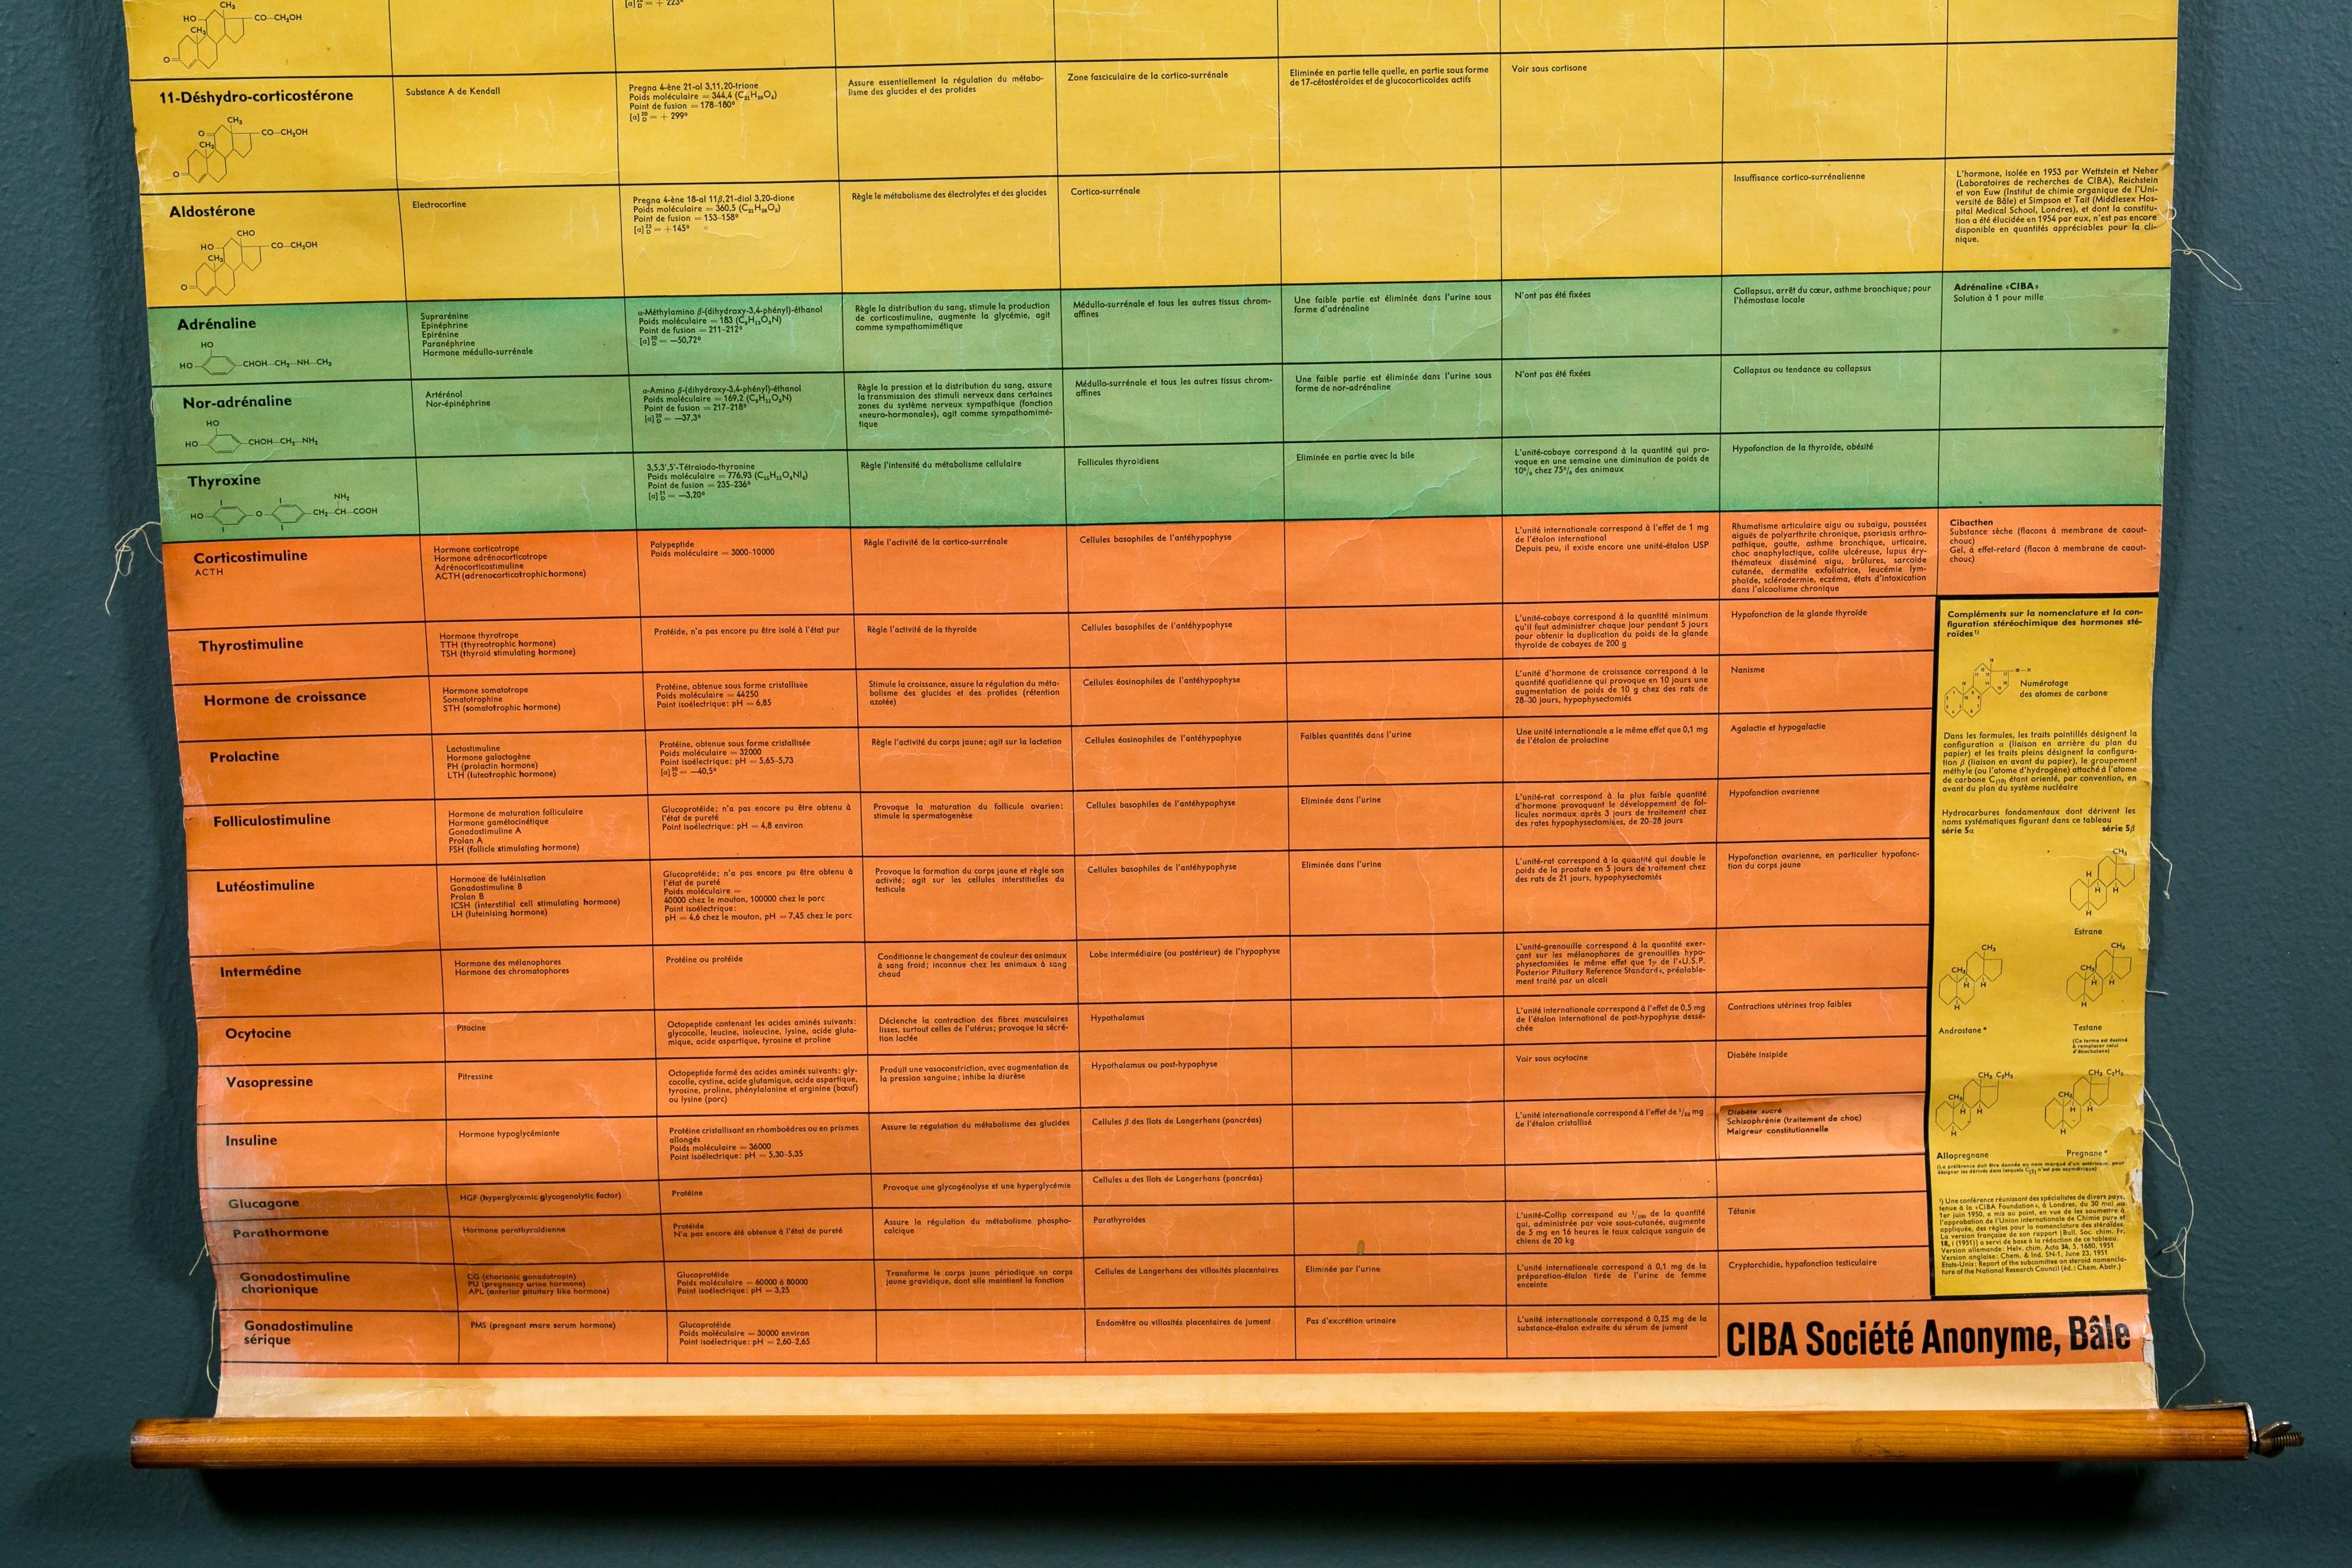 Laminated Swiss Chart with Table of Hormones in French, circa 1954